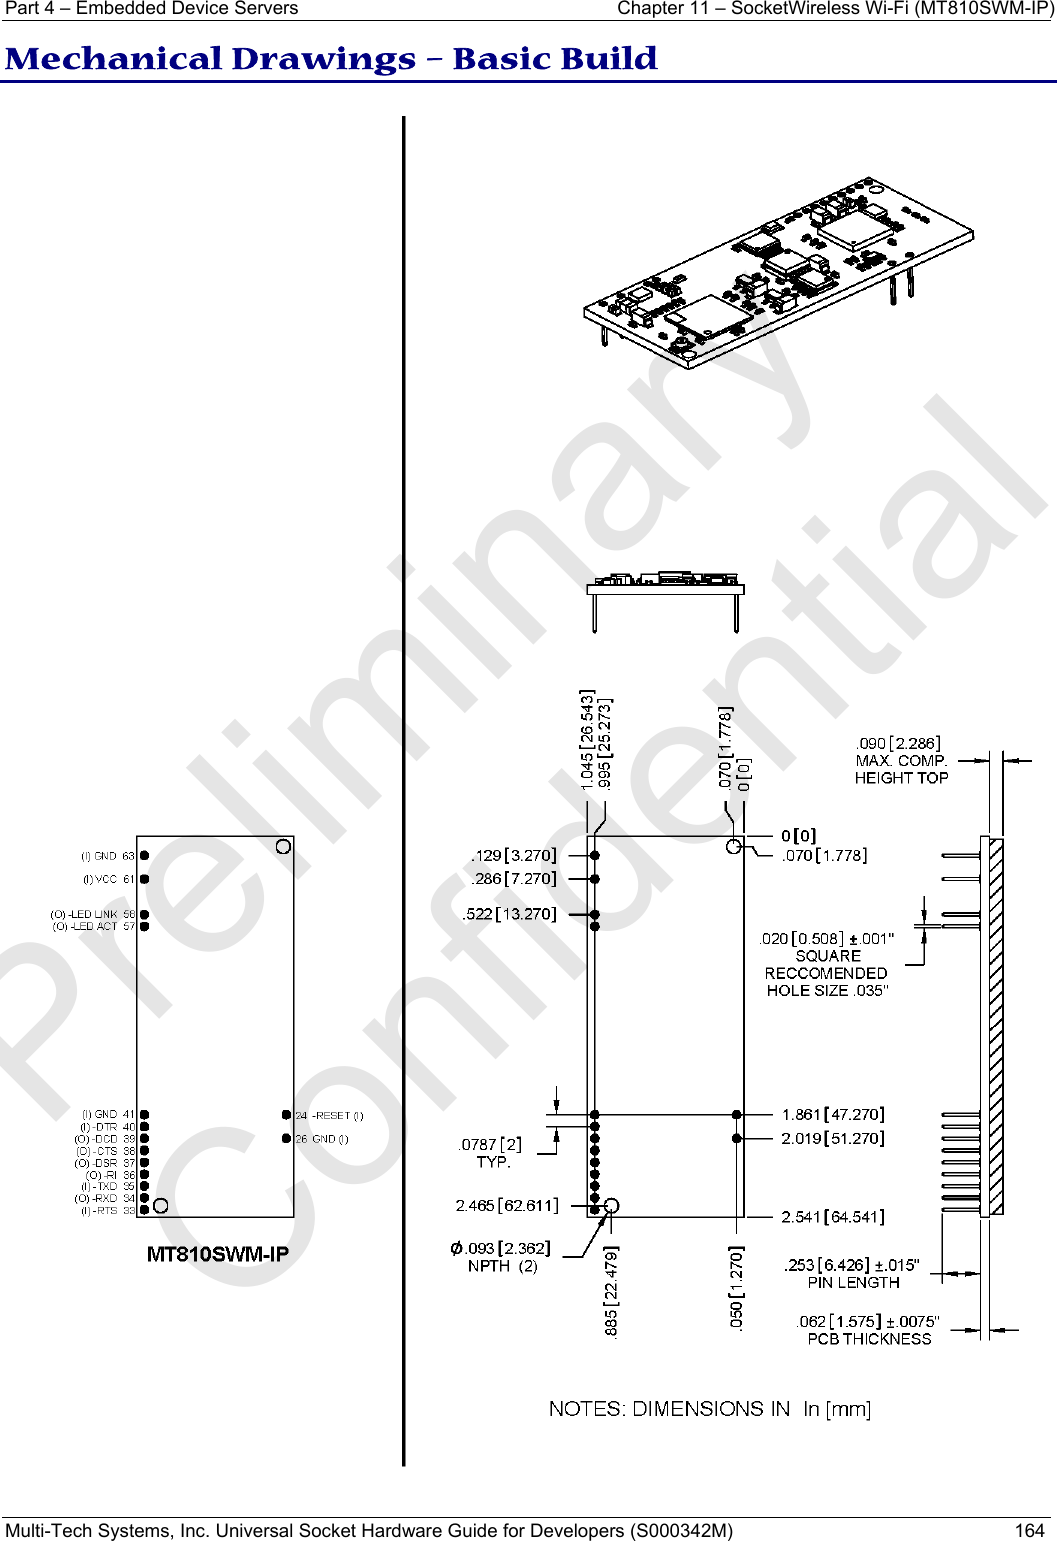 Part 4 – Embedded Device Servers  Chapter 11 – SocketWireless Wi-Fi (MT810SWM-IP) Multi-Tech Systems, Inc. Universal Socket Hardware Guide for Developers (S000342M)  164  Mechanical Drawings – Basic Build  Preliminary  Confidential